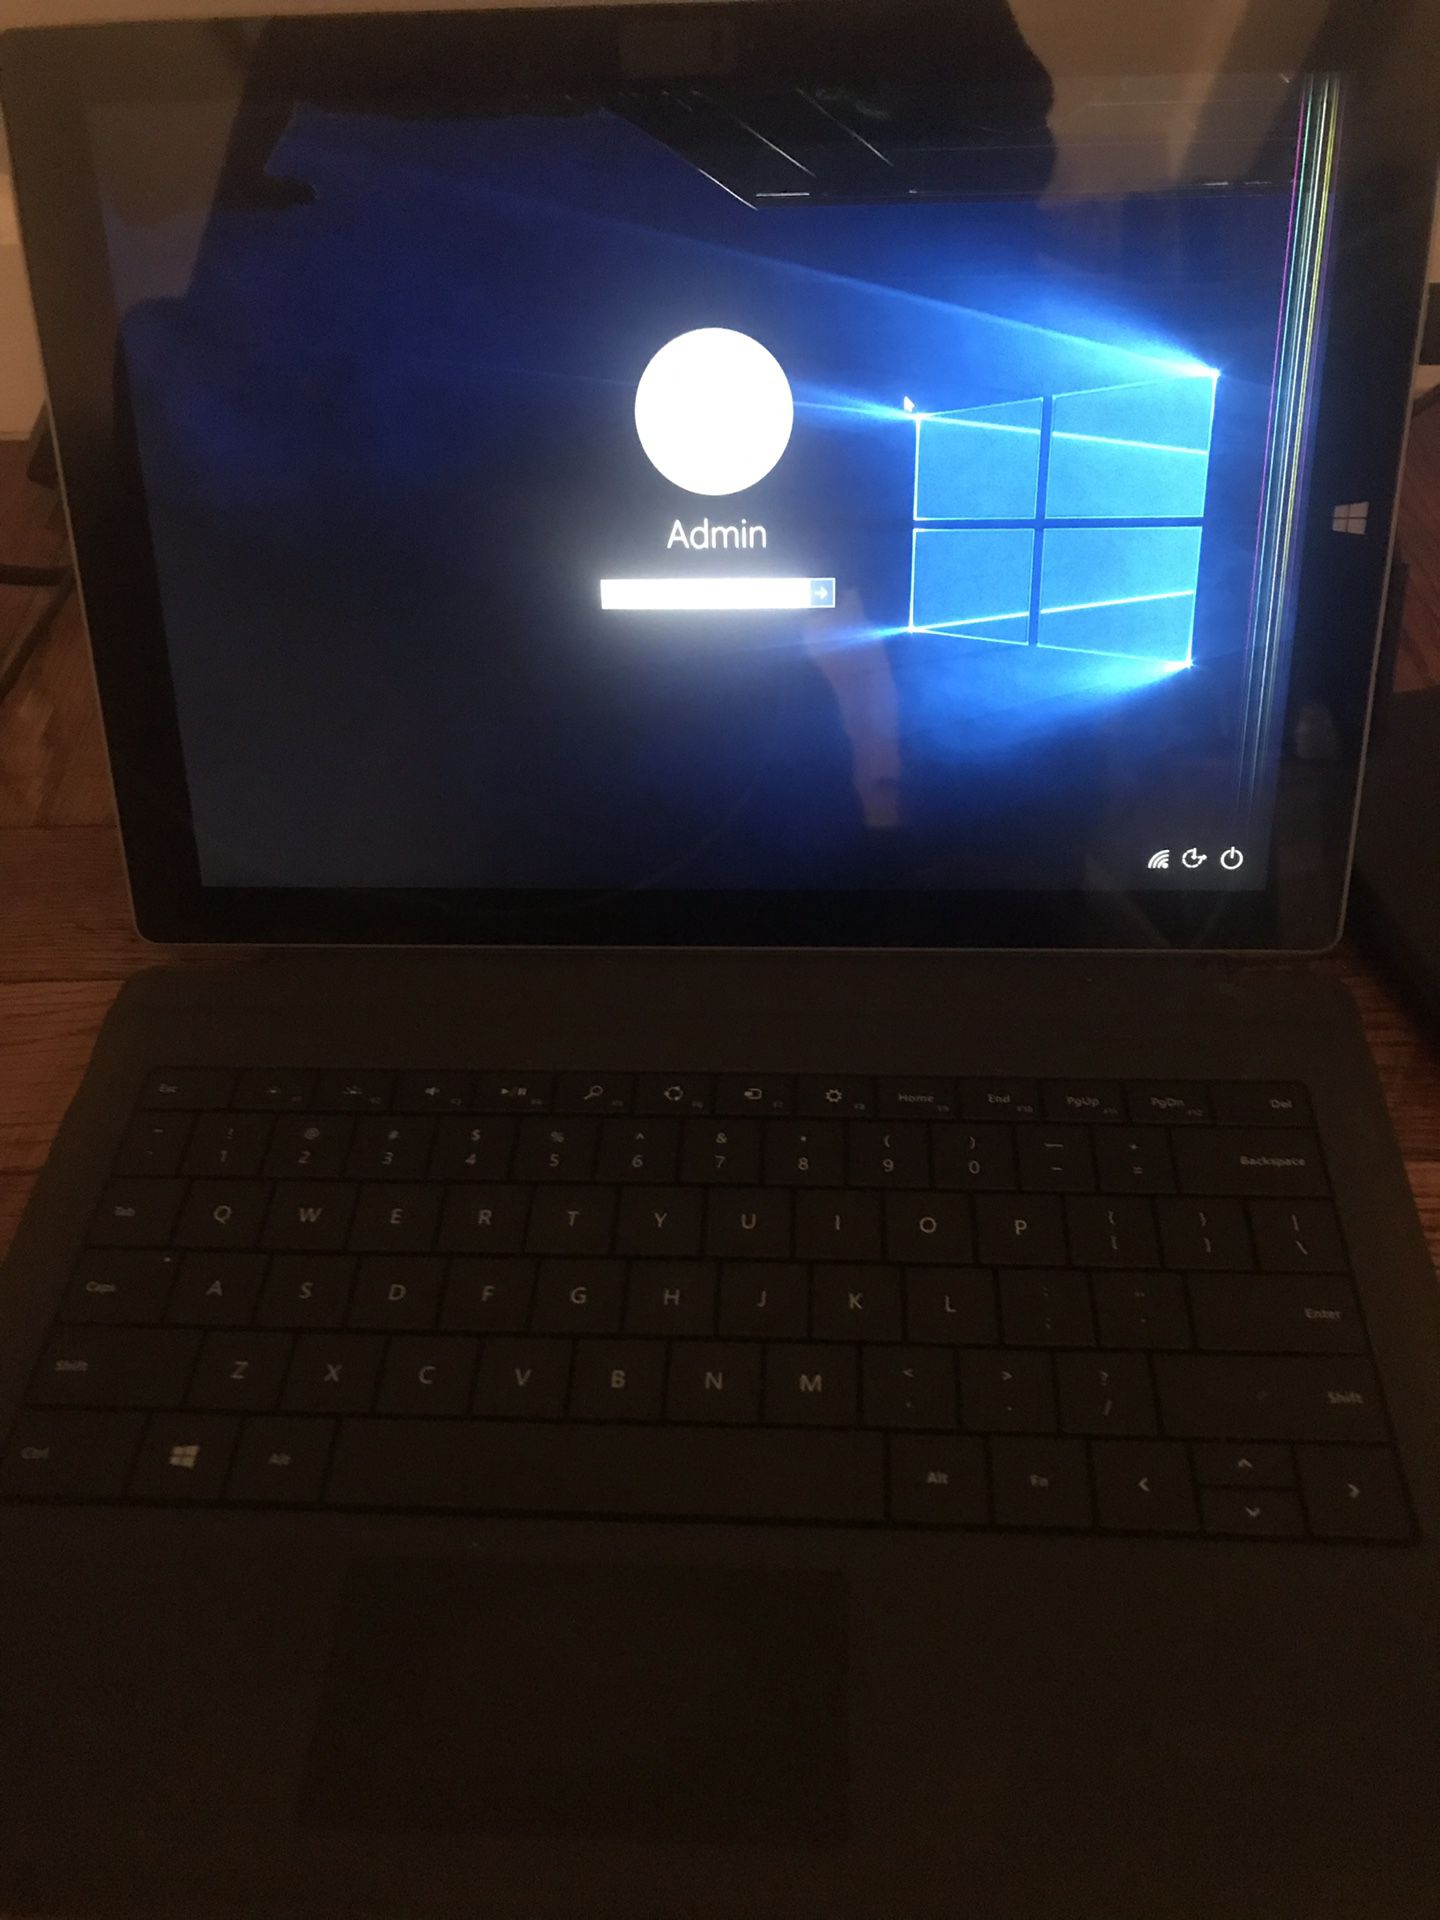 Microsoft Surface Pro 3 tablet (i7 processor ) - factory reset & screen damaged